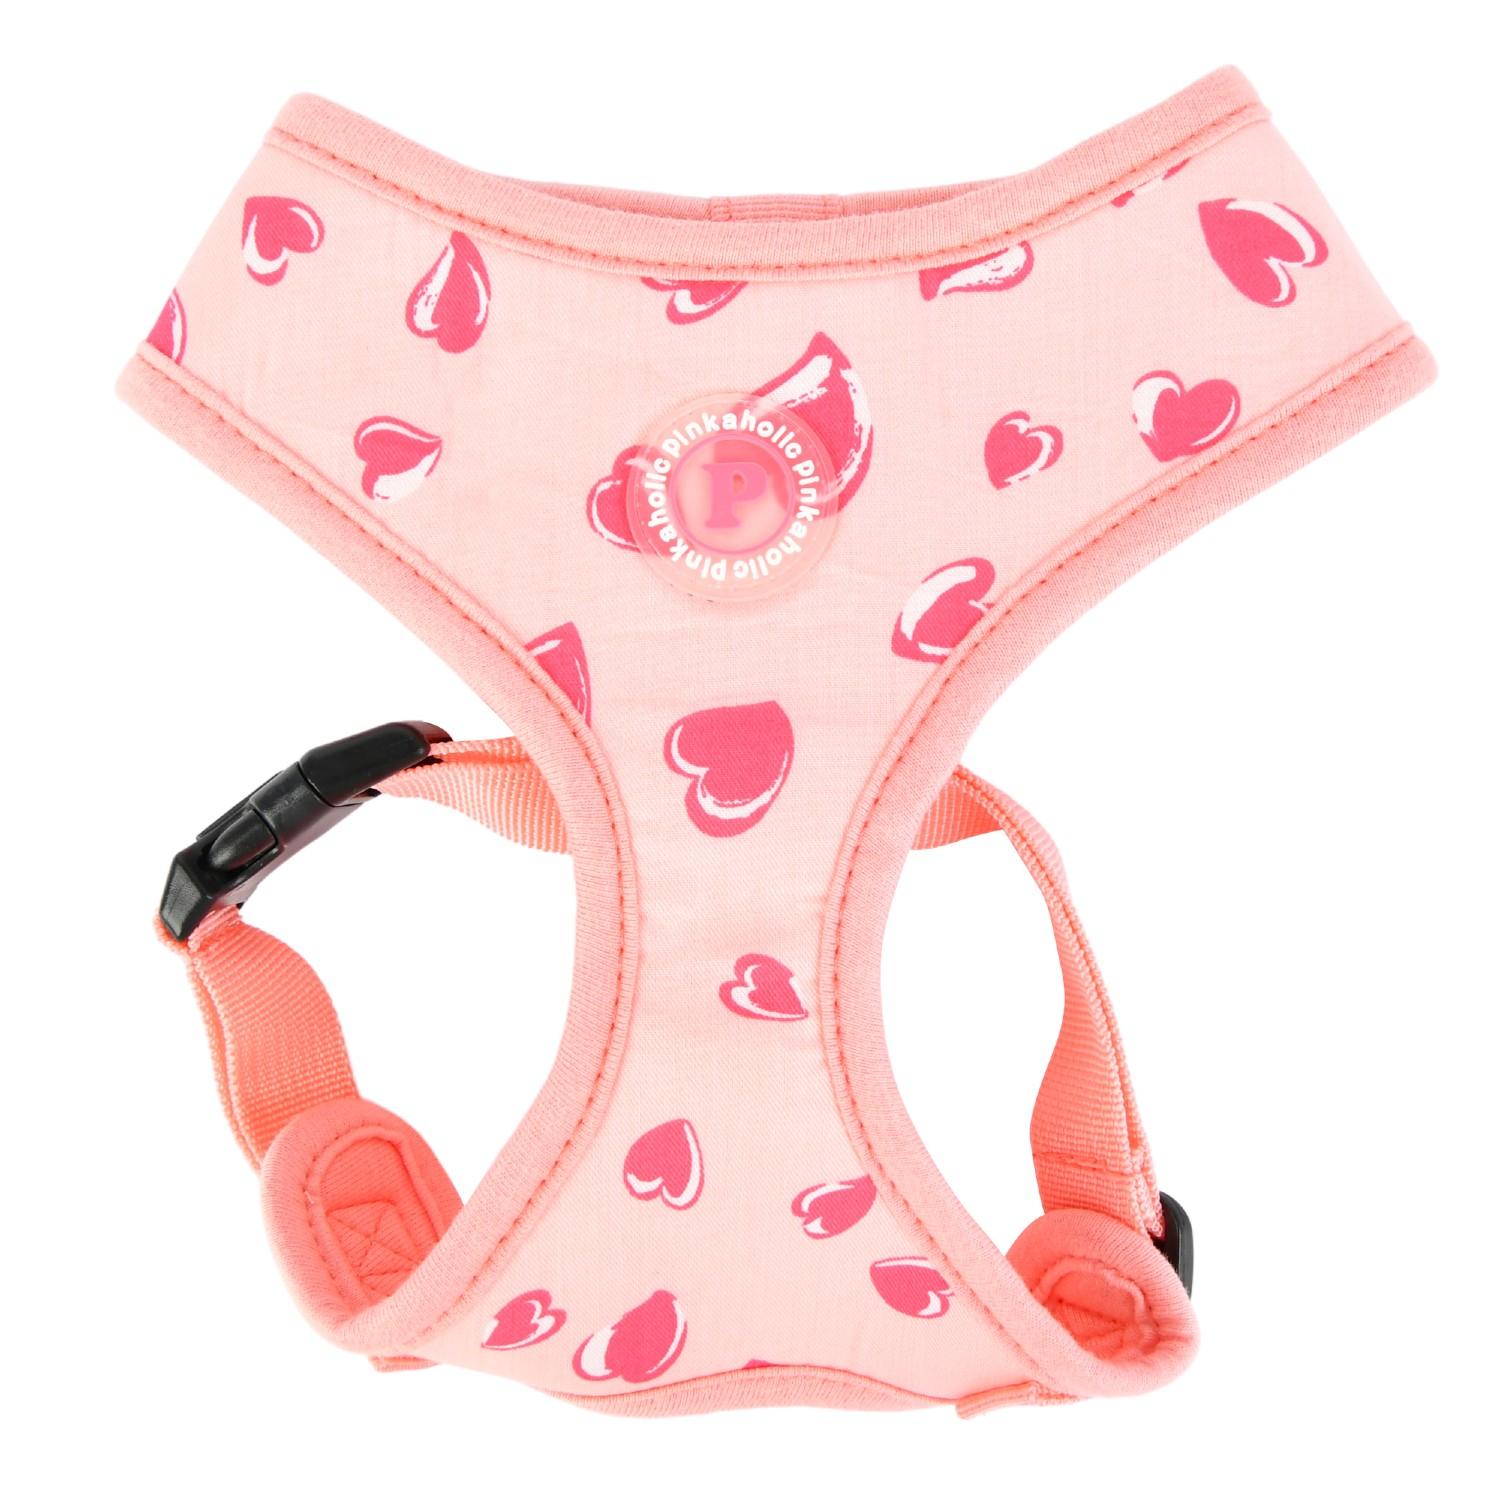 Loveday Basic Style Dog Harness by Pinkaholic - Indian Pink